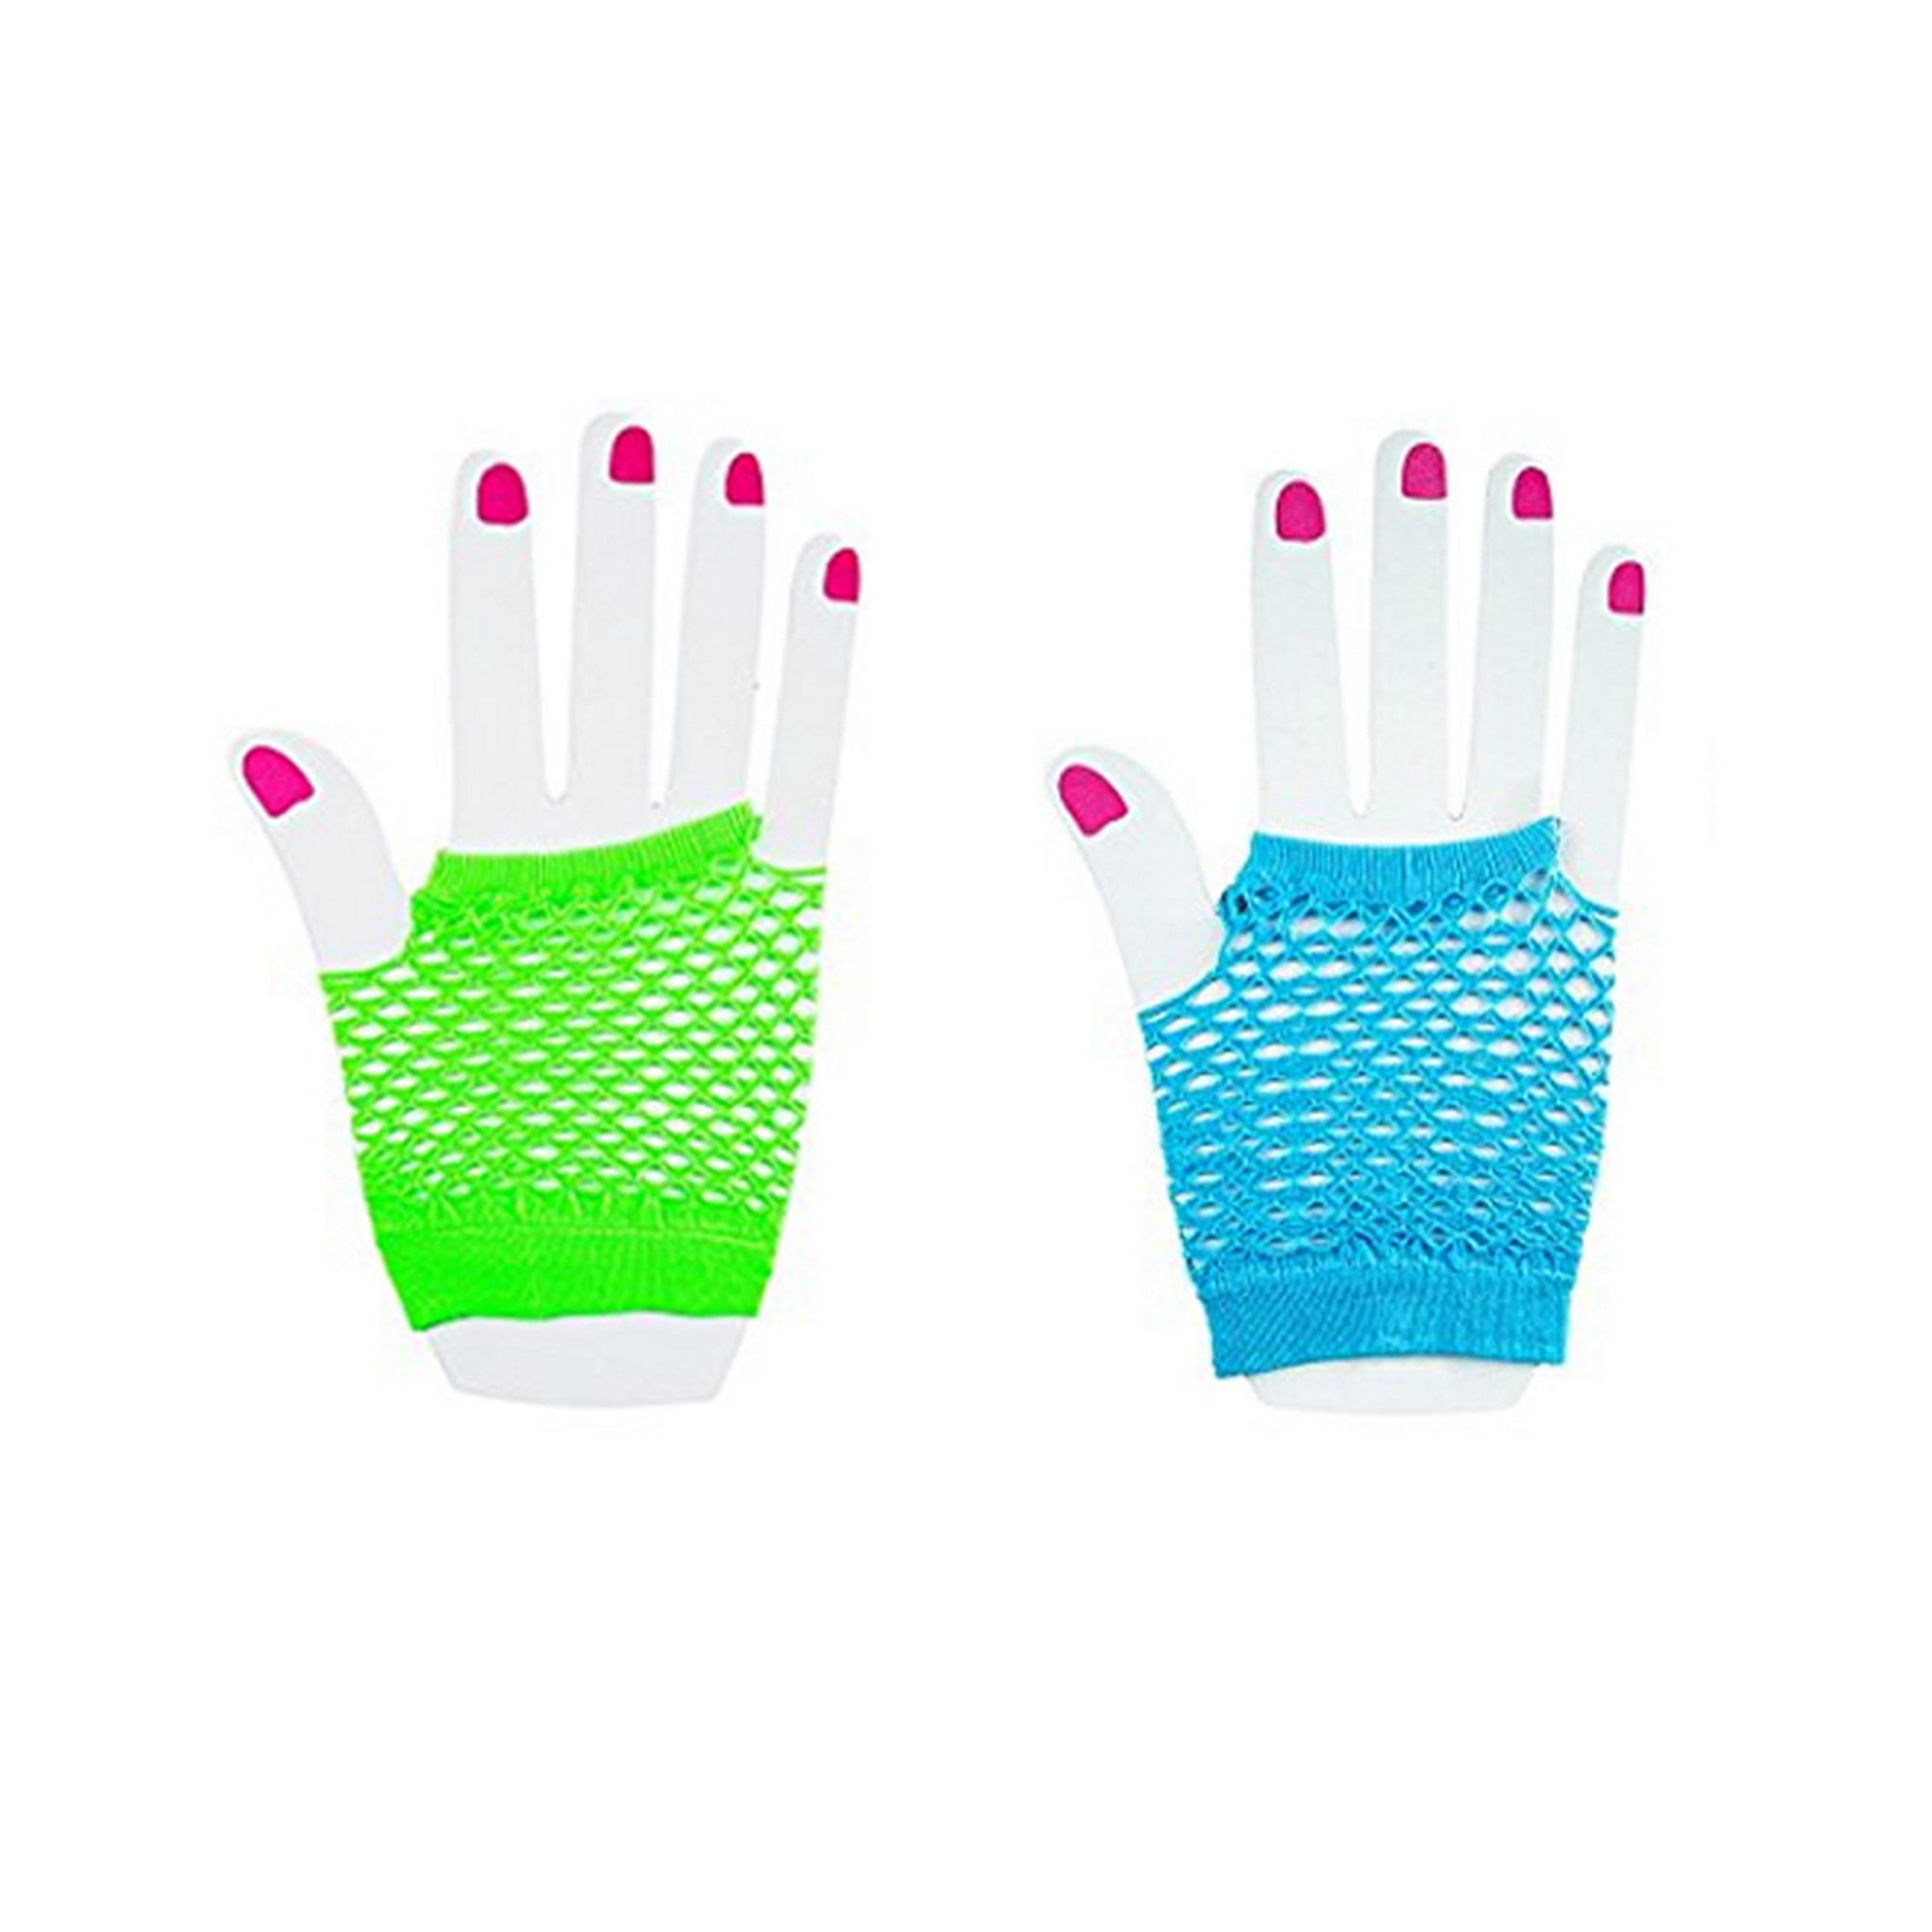 Novelty Place 12 Pairs Neon Gloves Fingerless Diva Fishnet Wrist Gloves Assorted Neon Colors